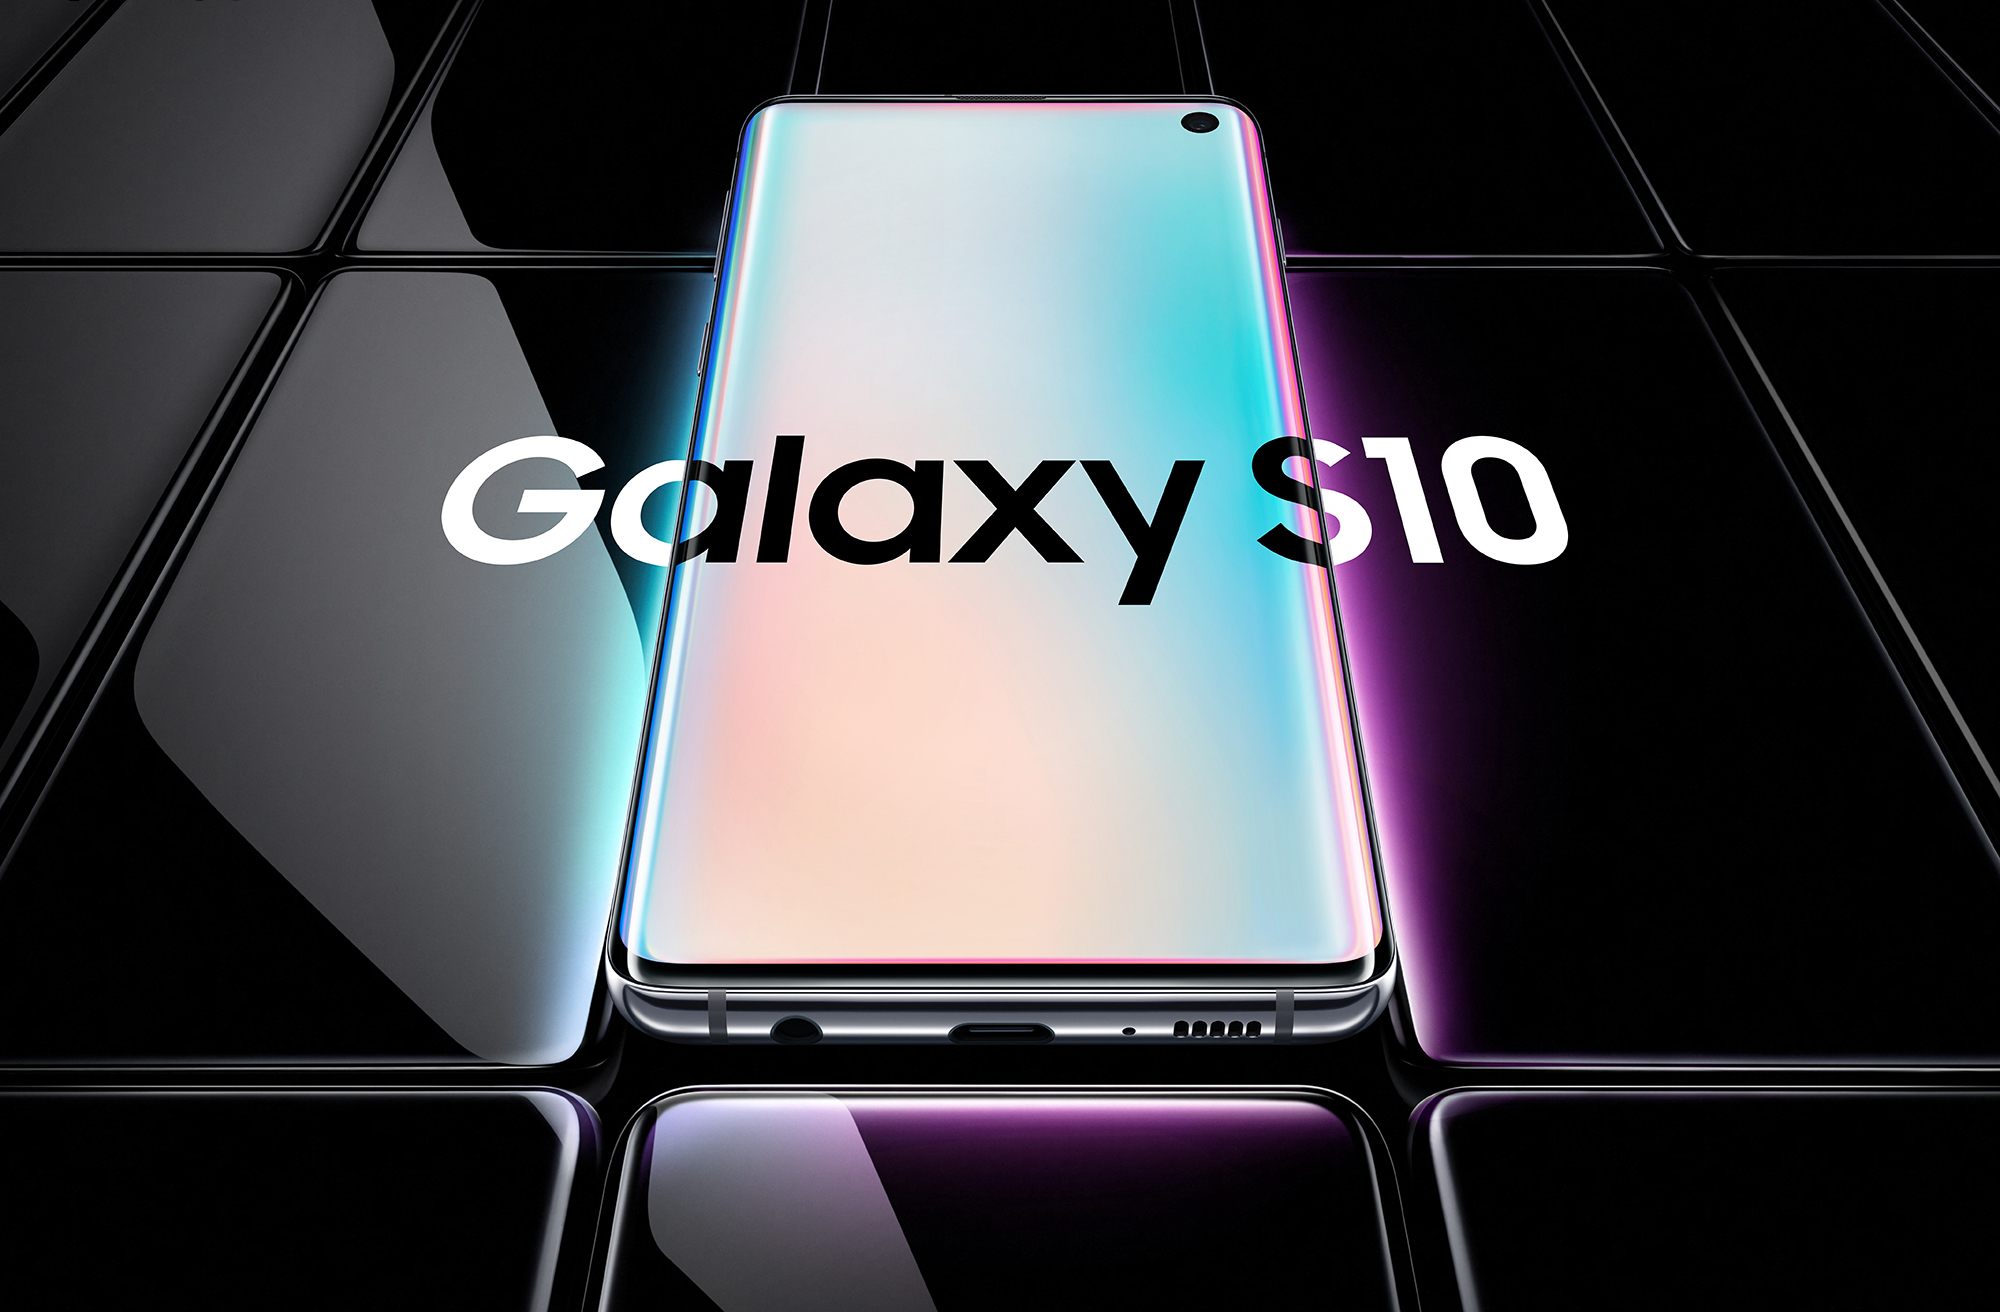 Which Galaxy S10 should I buy?